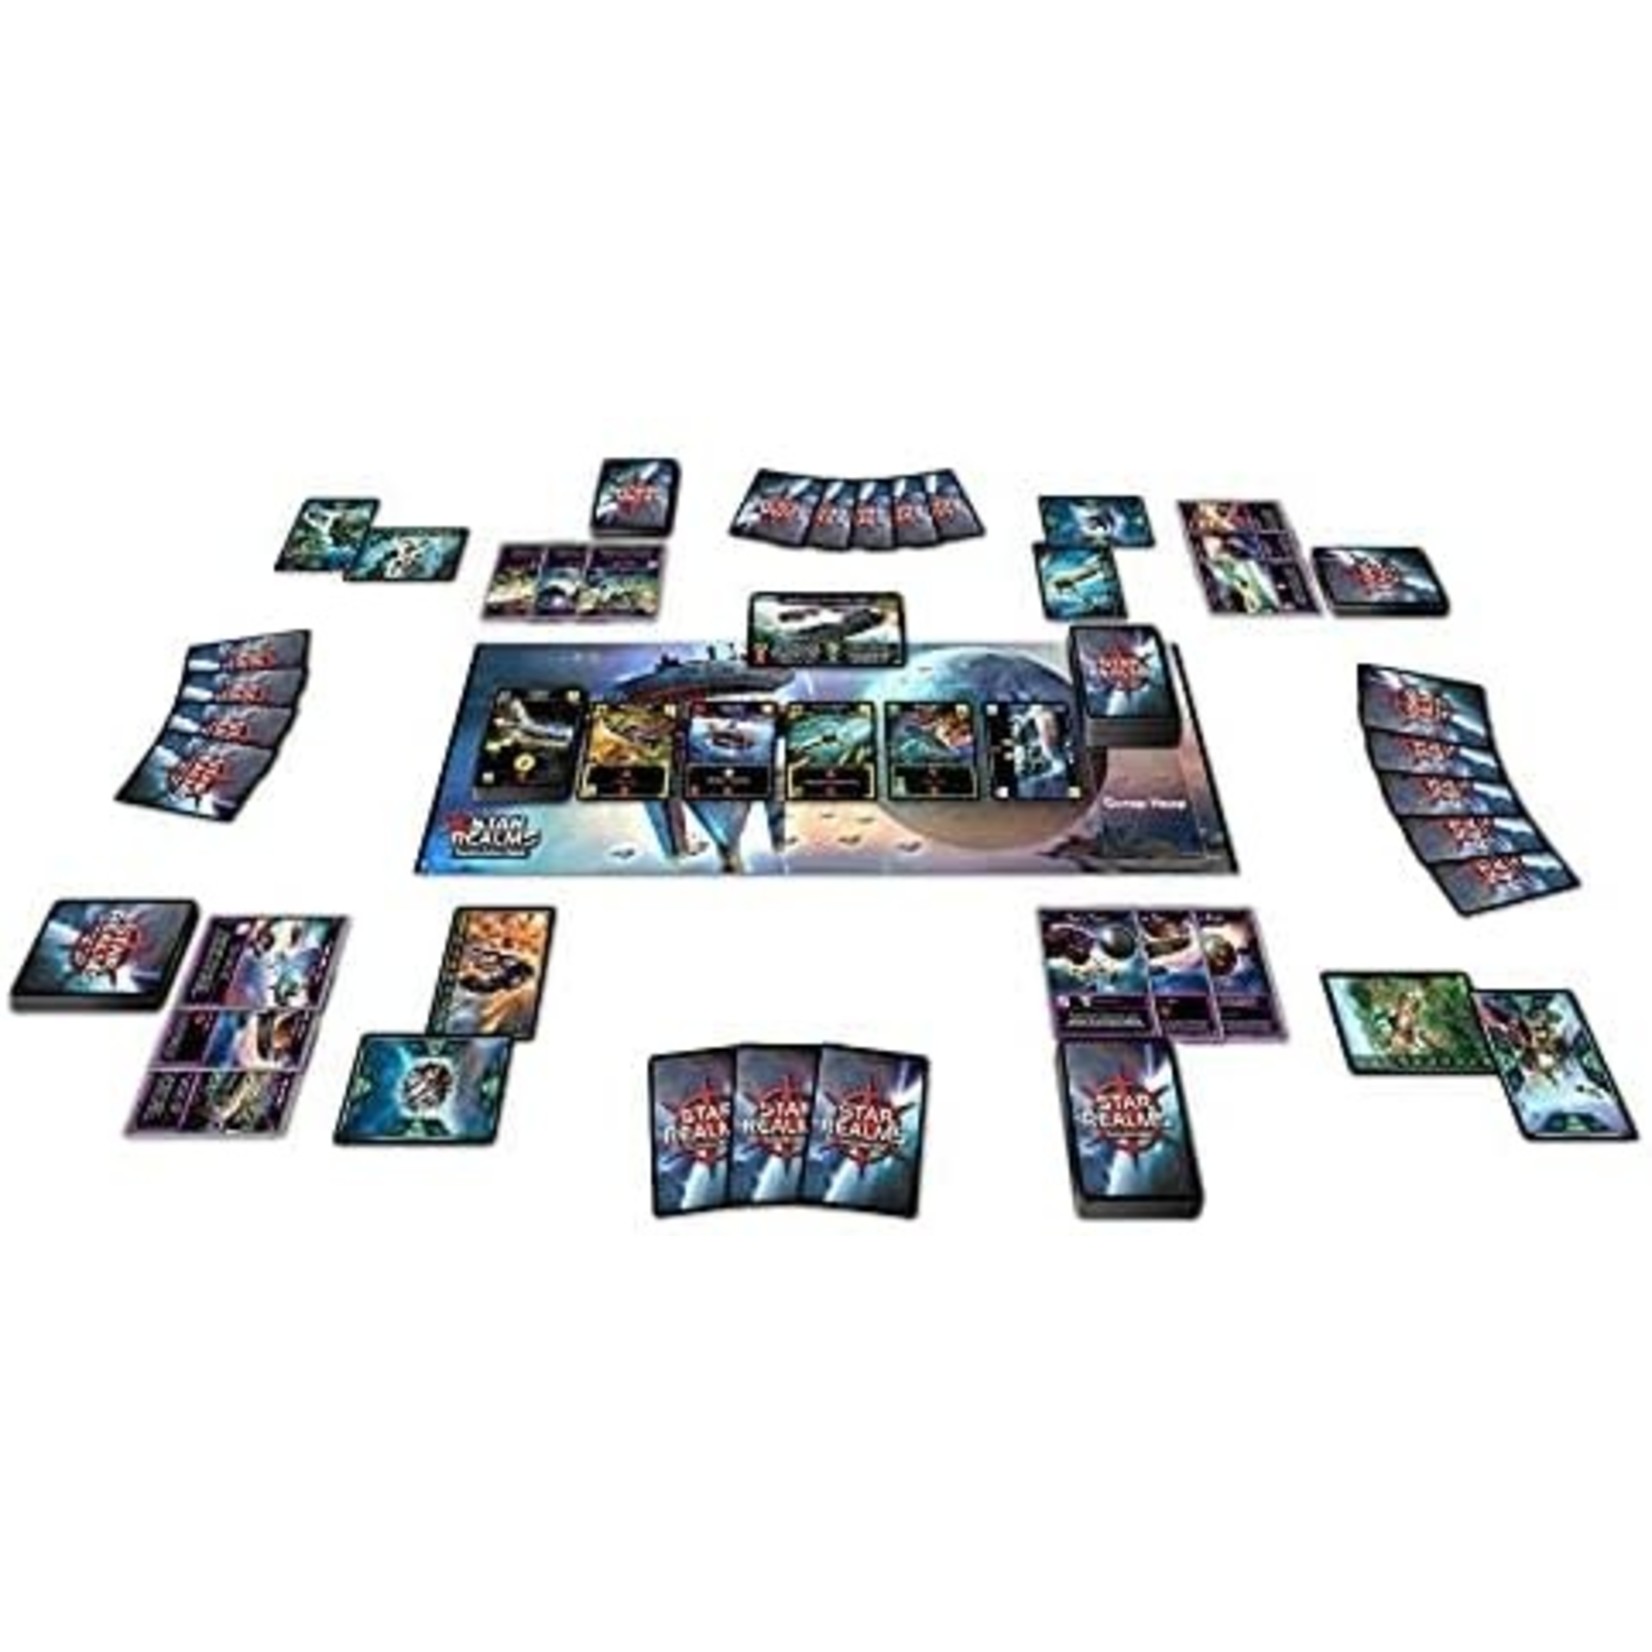 Wise Wizards Games Star Realms Box Set